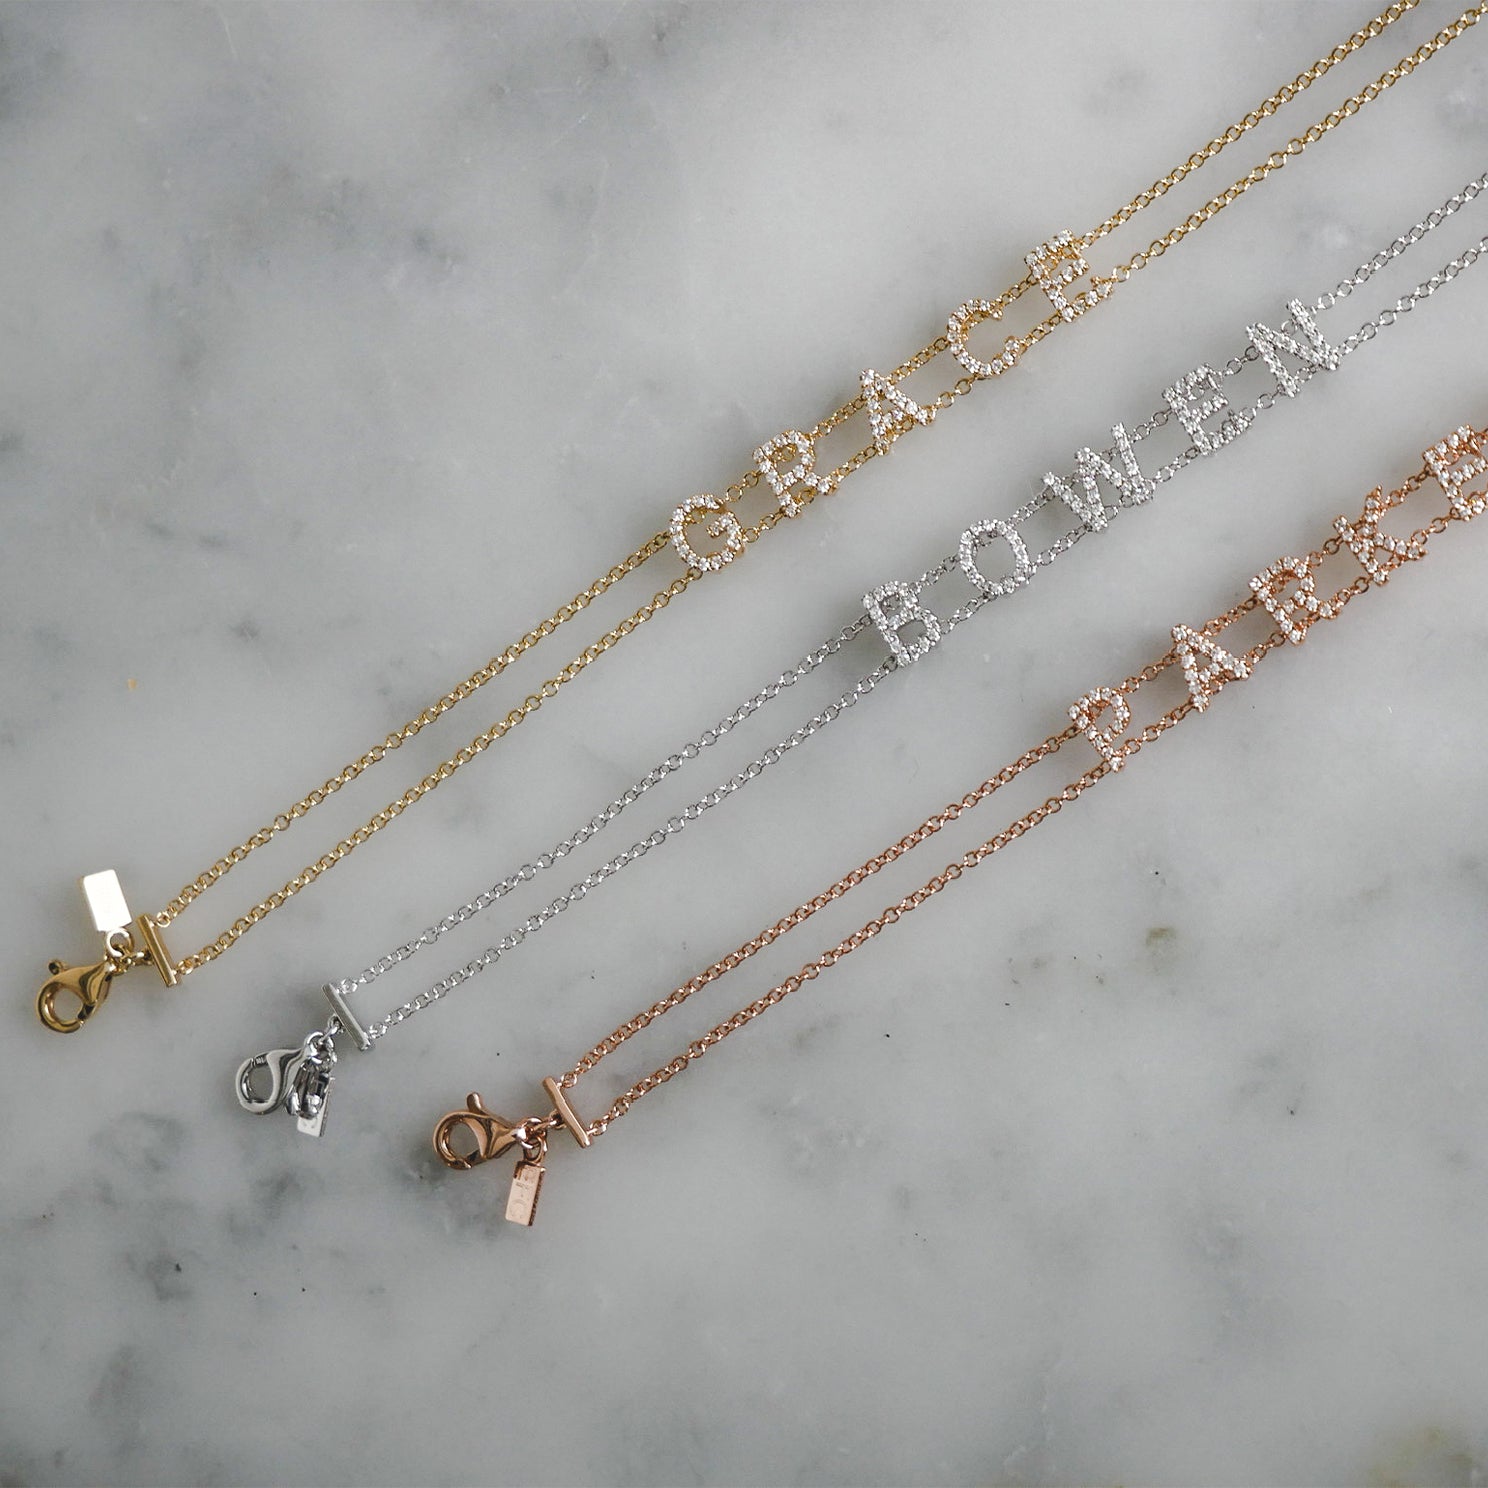 Personalized 14k Gold Letter Name Bracelet, Dainty Single Row Chain 1 2 3 4  5 Letters Bracelet is a Great Gift For Her. Bridesmaid Gift